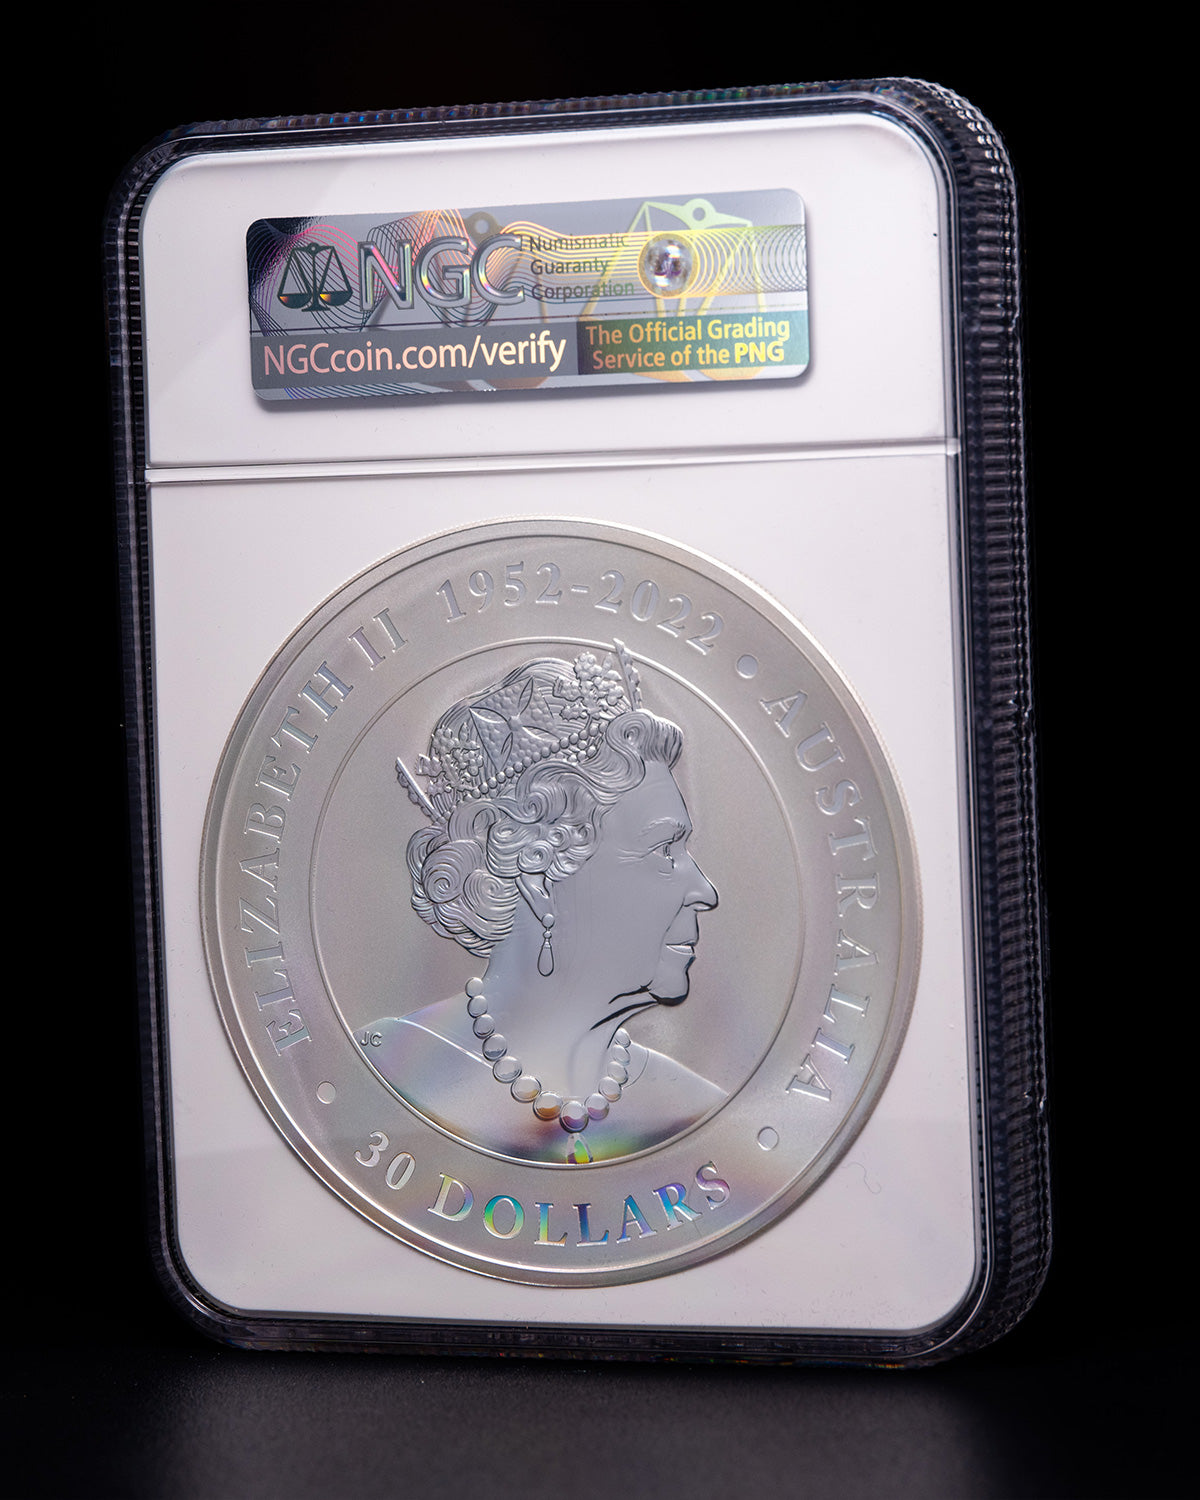 2023 1 Kilo $30 Australia Wedge-Tailed Eagle | First Day of Issue NGC Reverse Proof 70 Ultra High Relief | John Mercanti Autographed